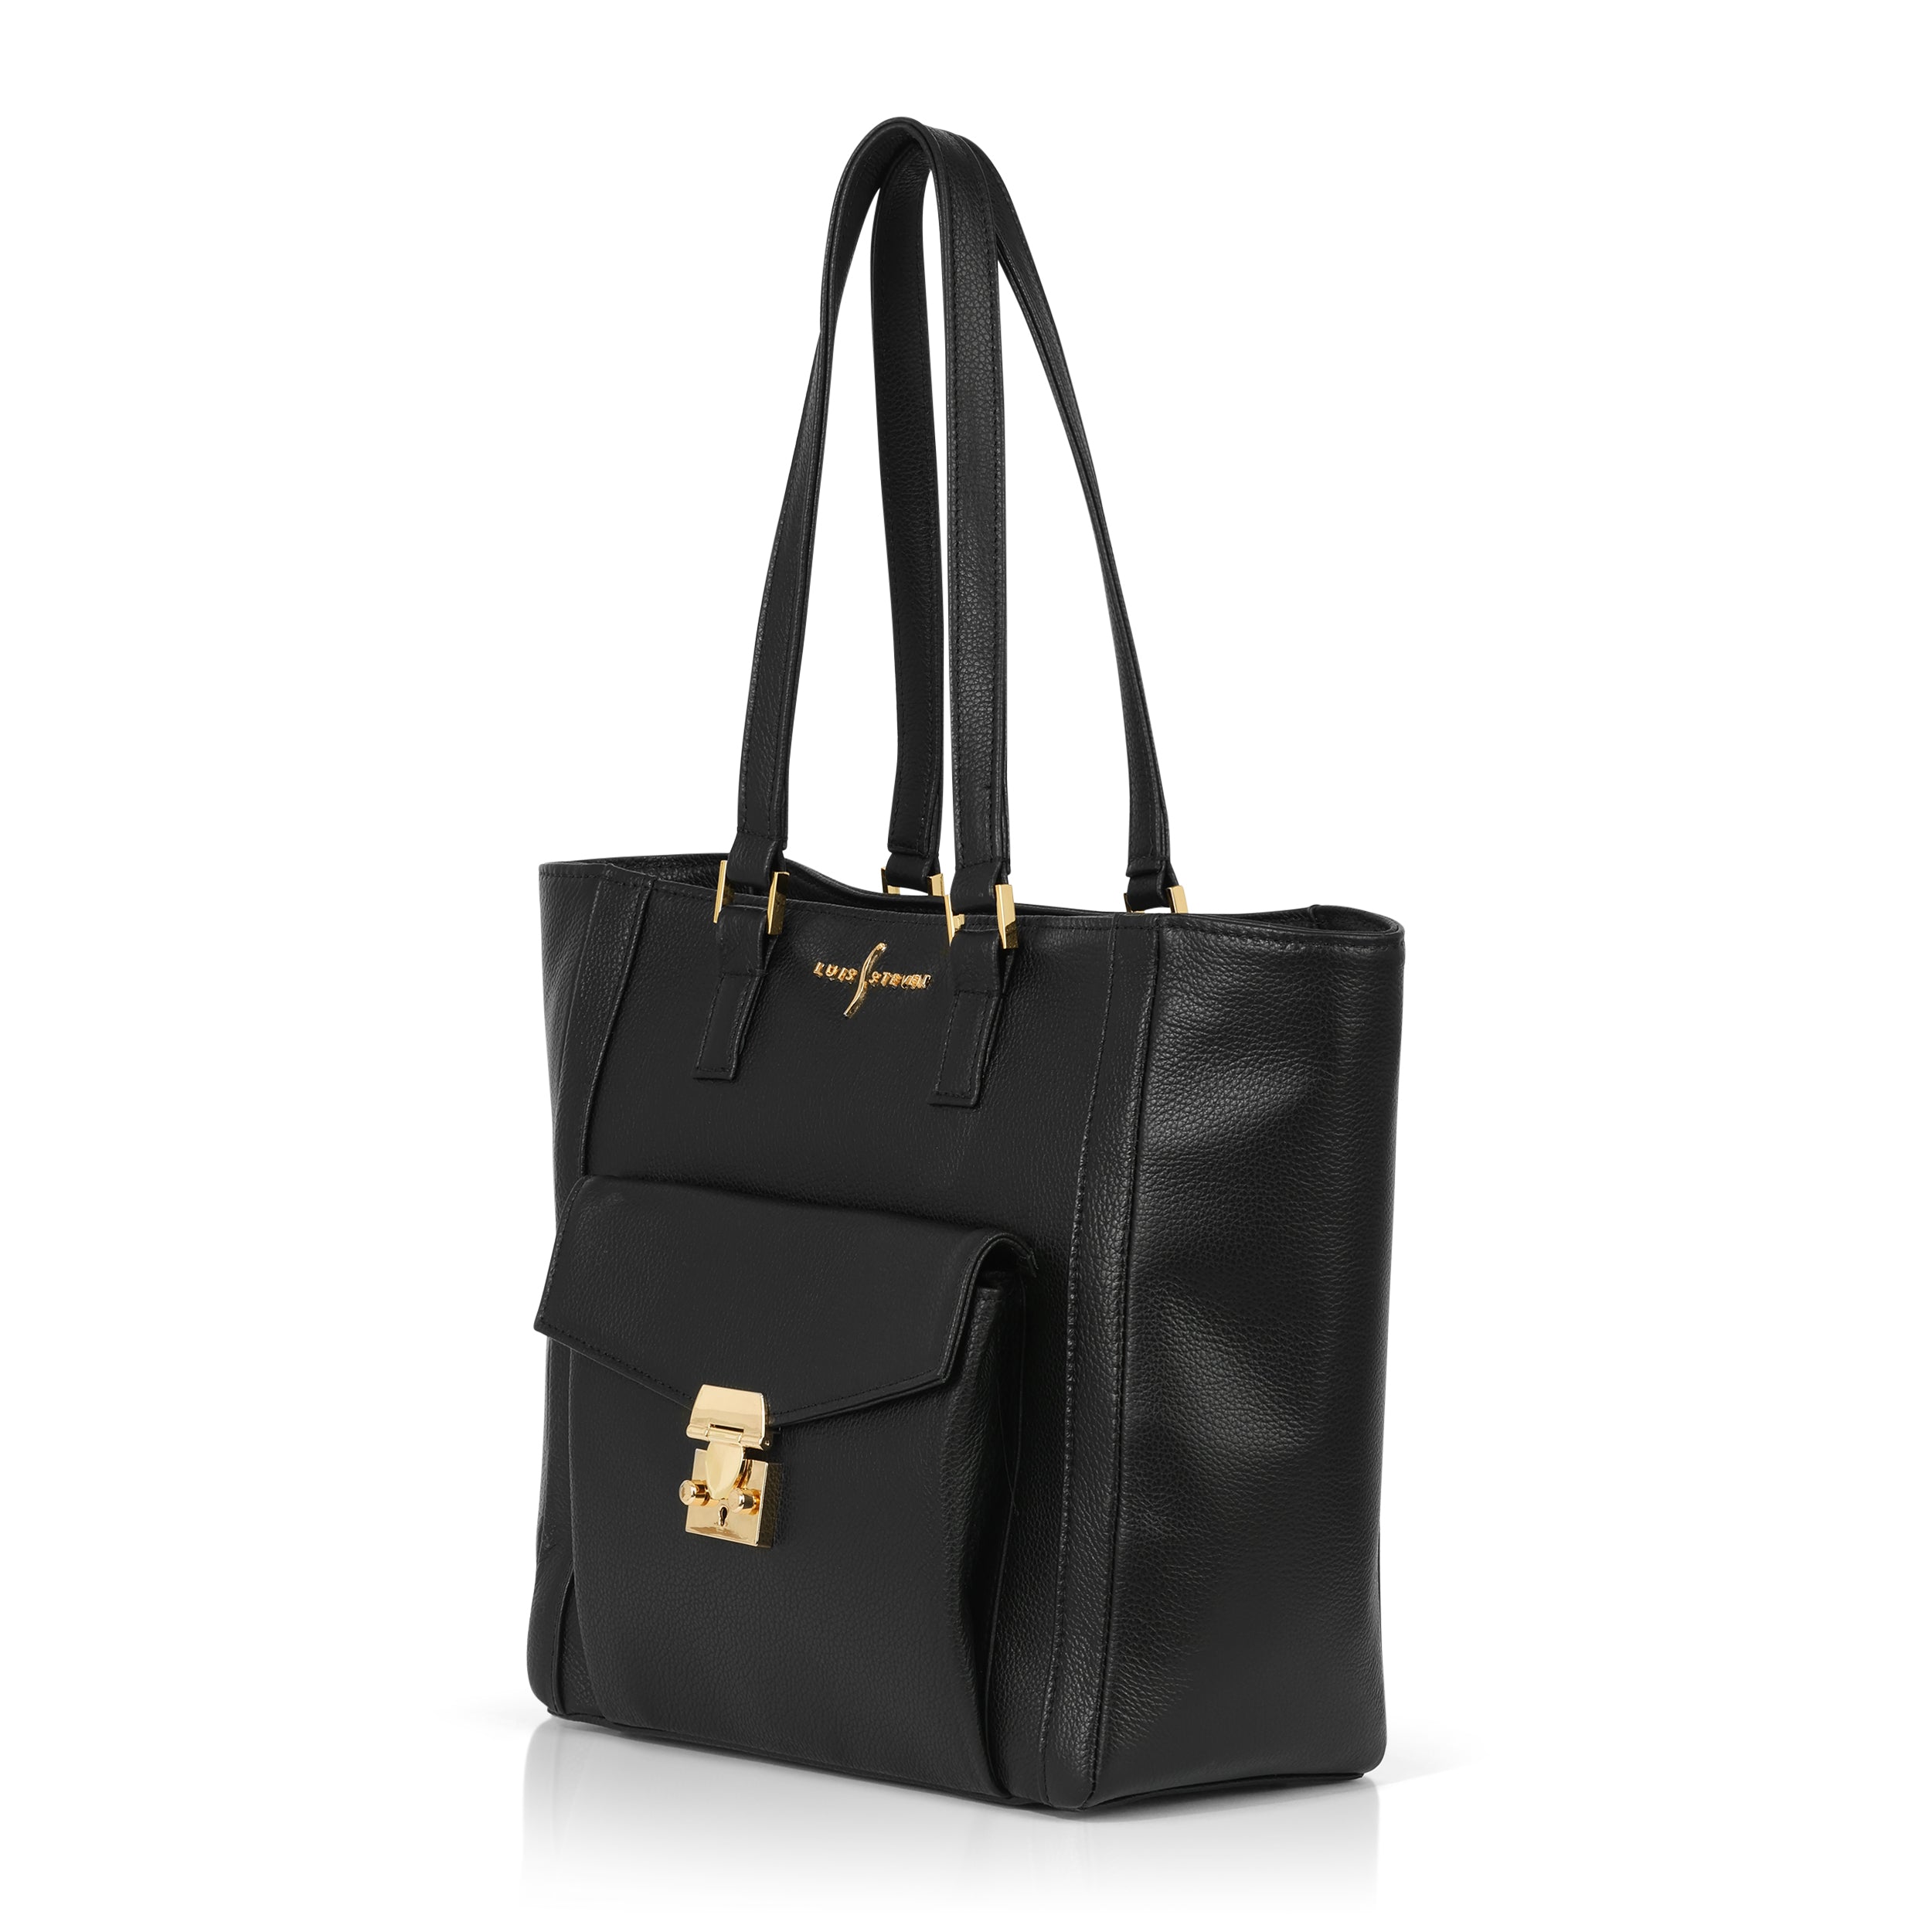 Classic Tote - Black Pebble with Front Pocket